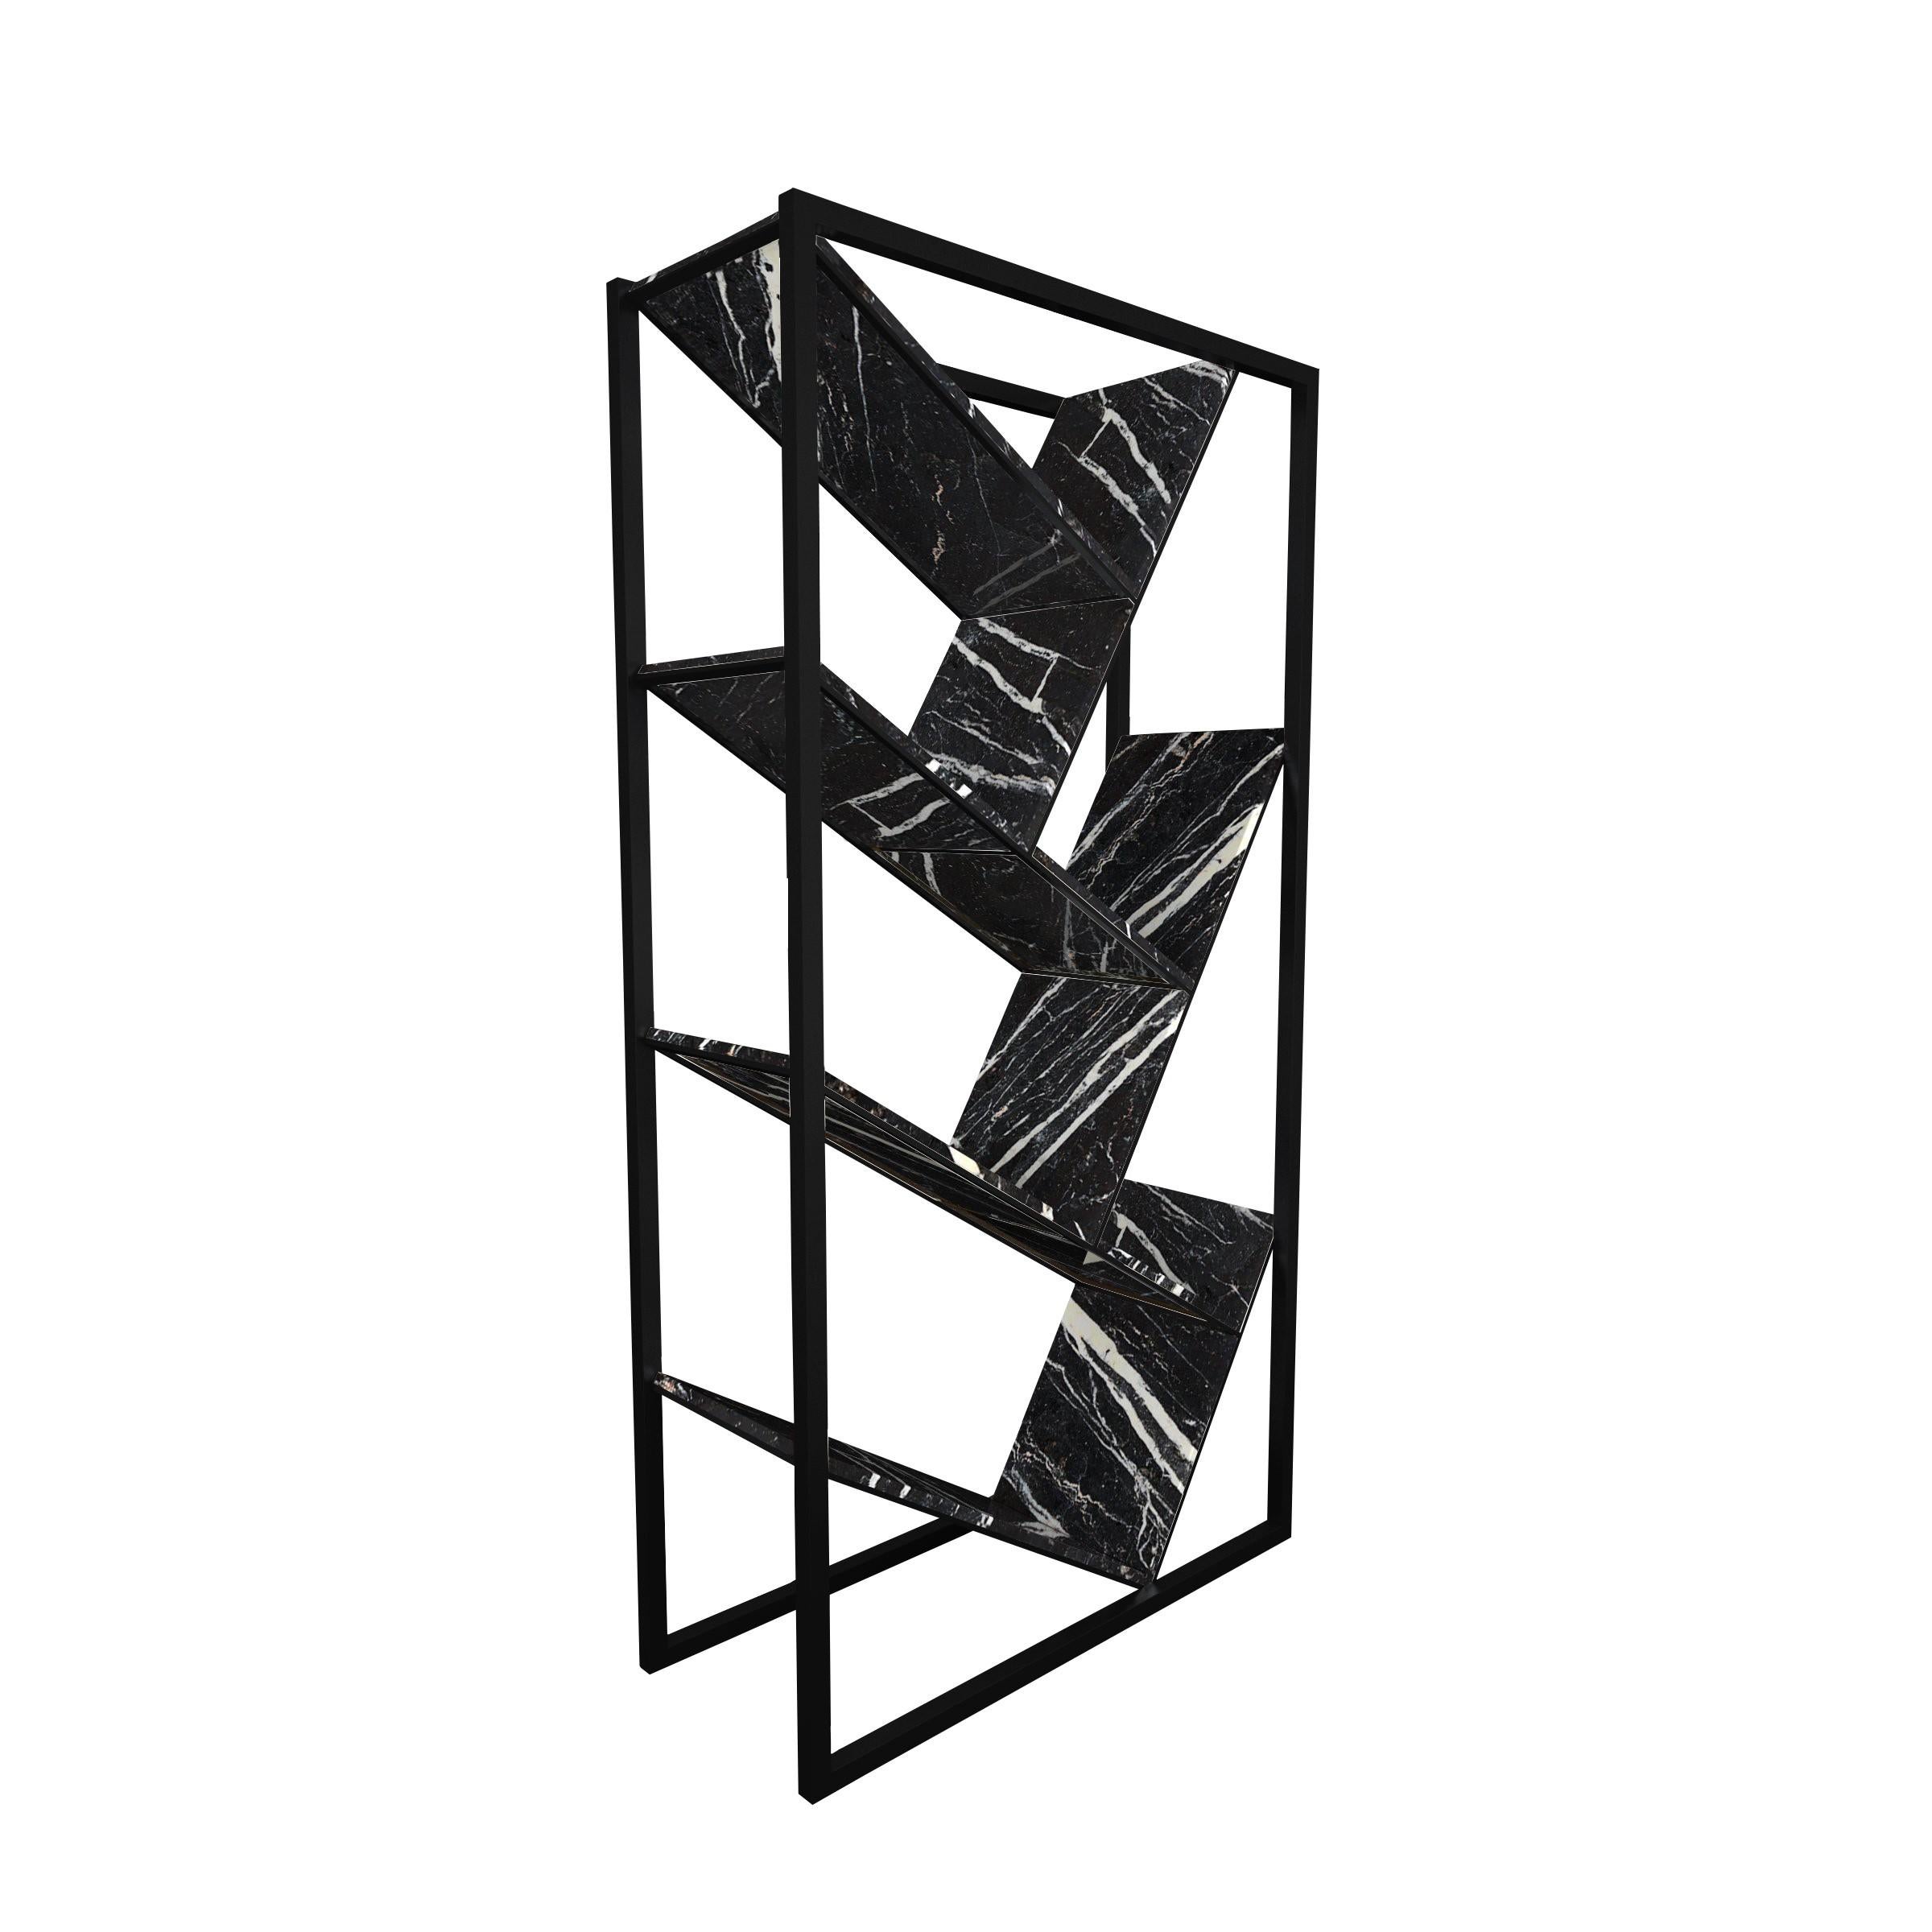 𝗣𝗿𝗼𝗱𝘂𝗰𝘁 𝗗𝗲𝘁𝗮𝗶𝗹𝘀:
Modern designed bookshelf composed of 6 fixed shelves in a diagonal position. The backless feature of this bookshelf makes it practical to use as a room divider, which, when combined with a 2nd or 3rd bookshelf, can